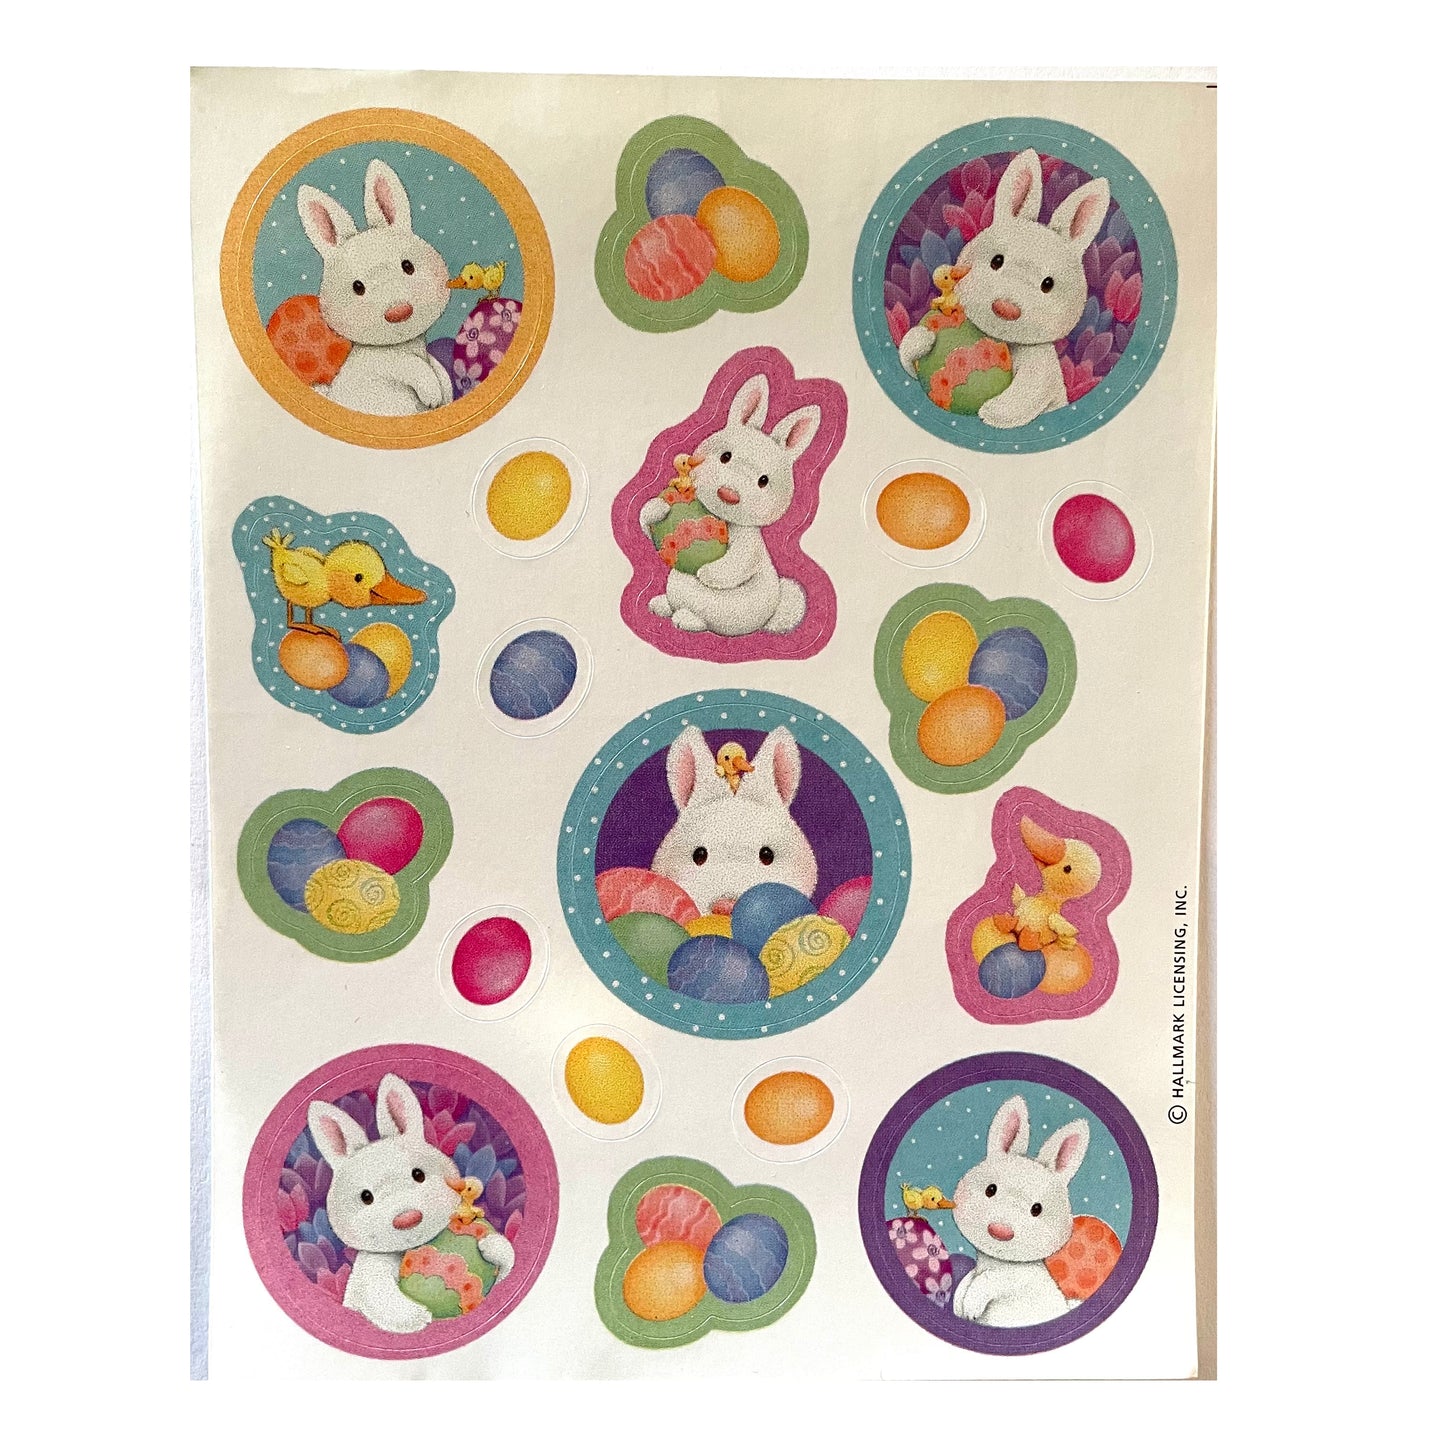 HALLMARK: Easter Bunny with Pastel Outlines Stickers